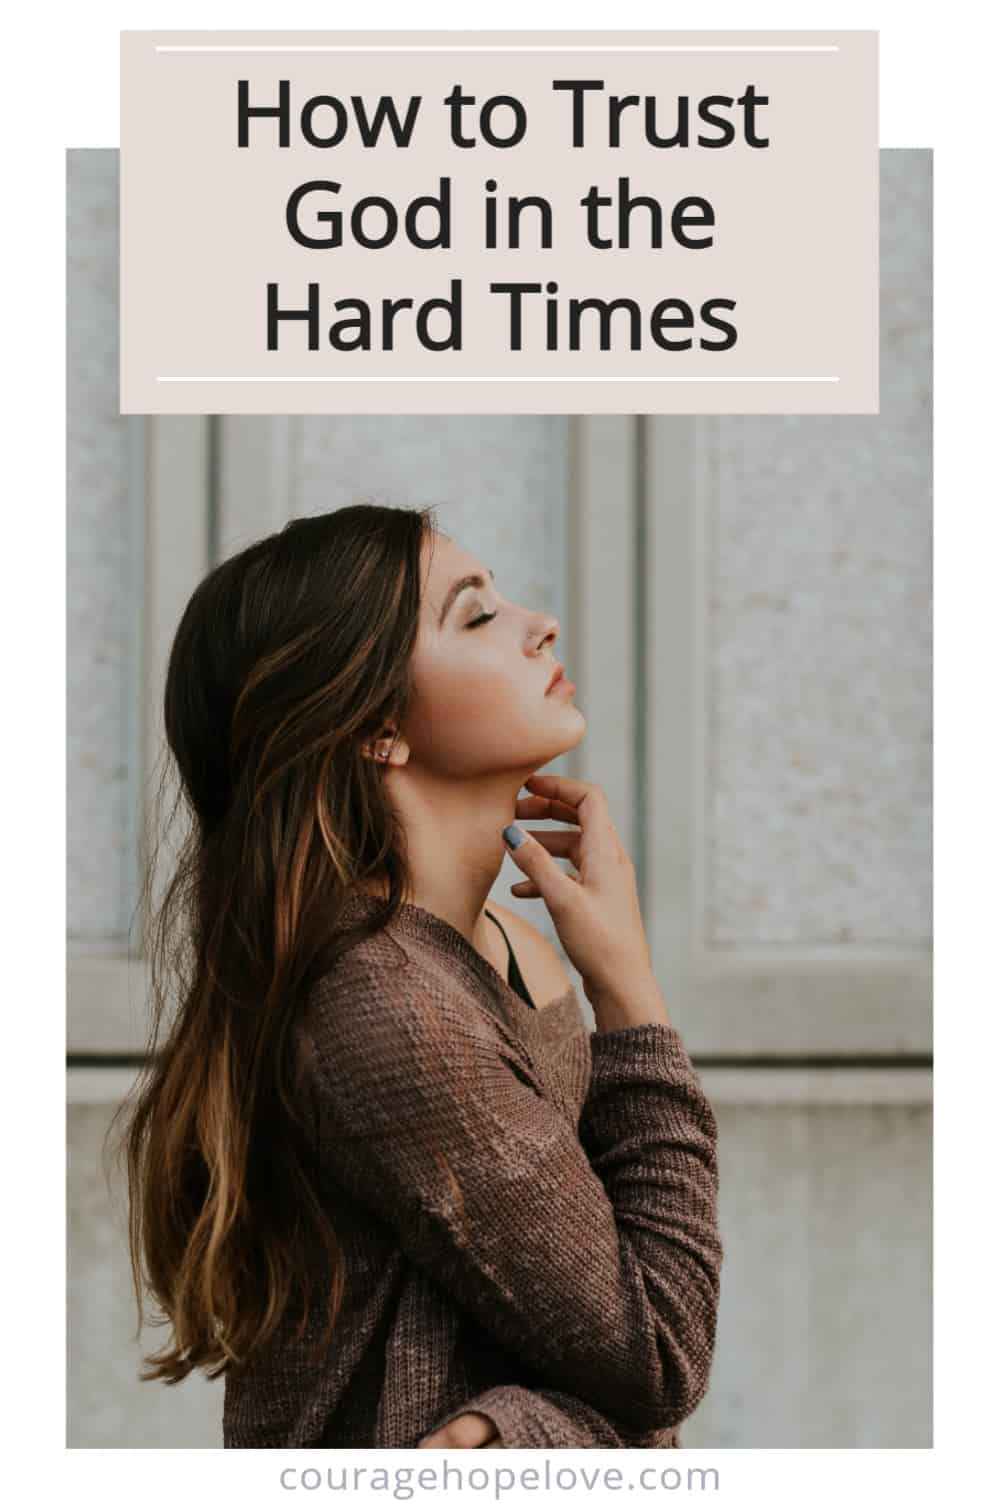 How to Trust God in the Hard Times